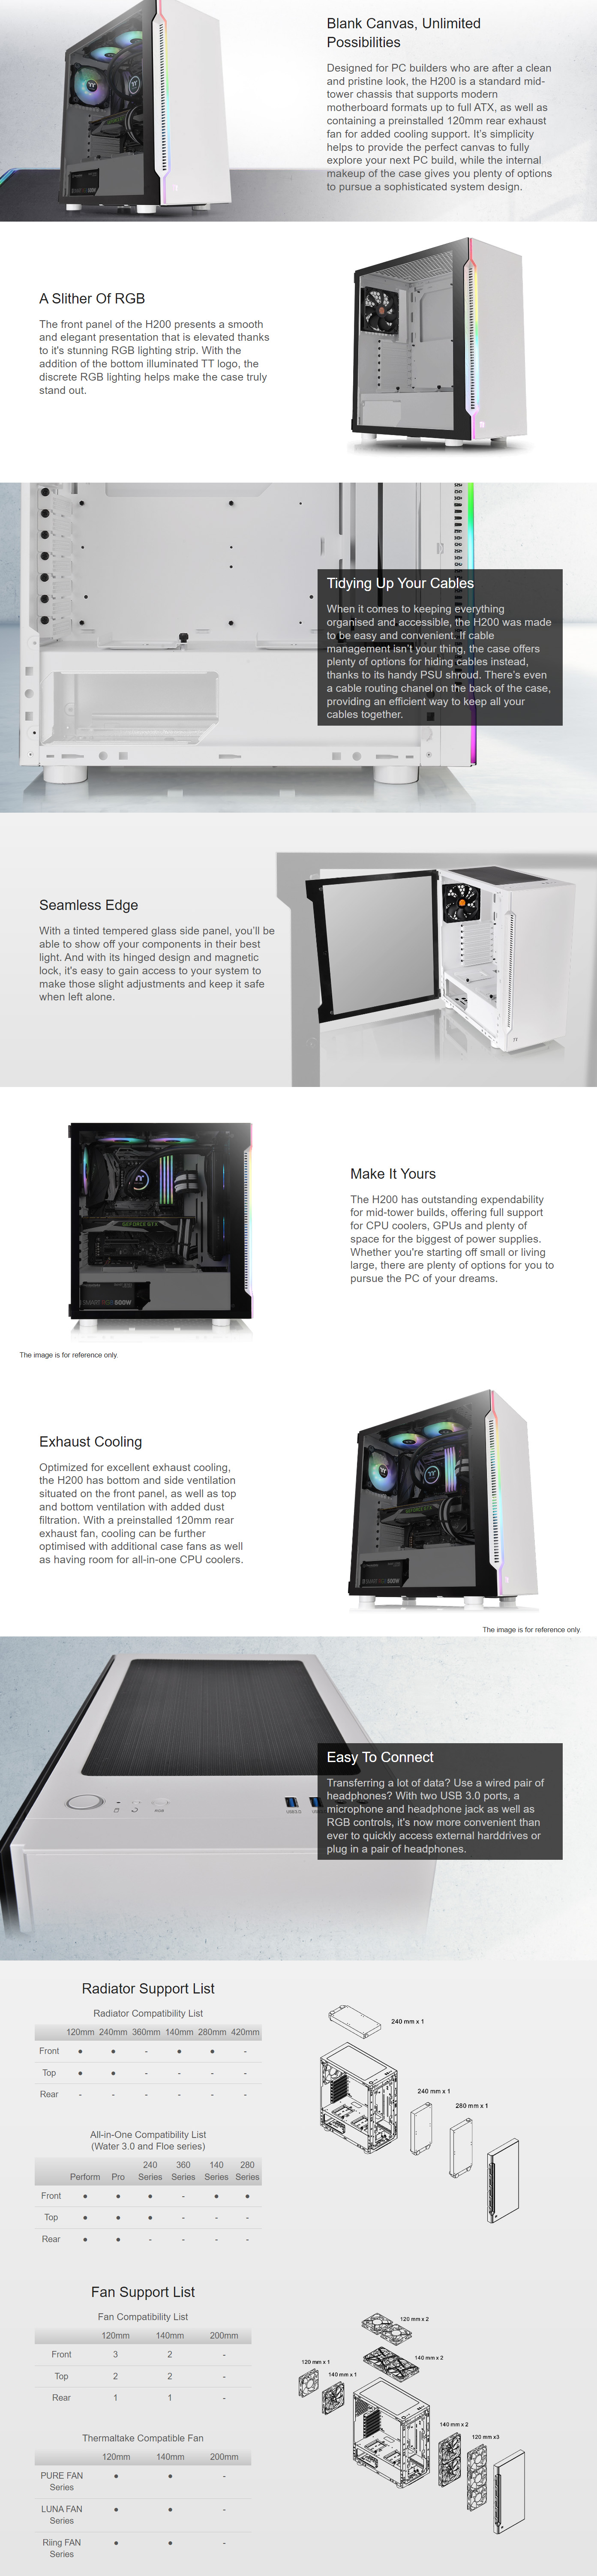 Thermaltake-Cases-Thermaltake-H200-Tempered-Glass-RGB-Mid-Tower-ATX-Case-Snow-Edition-1